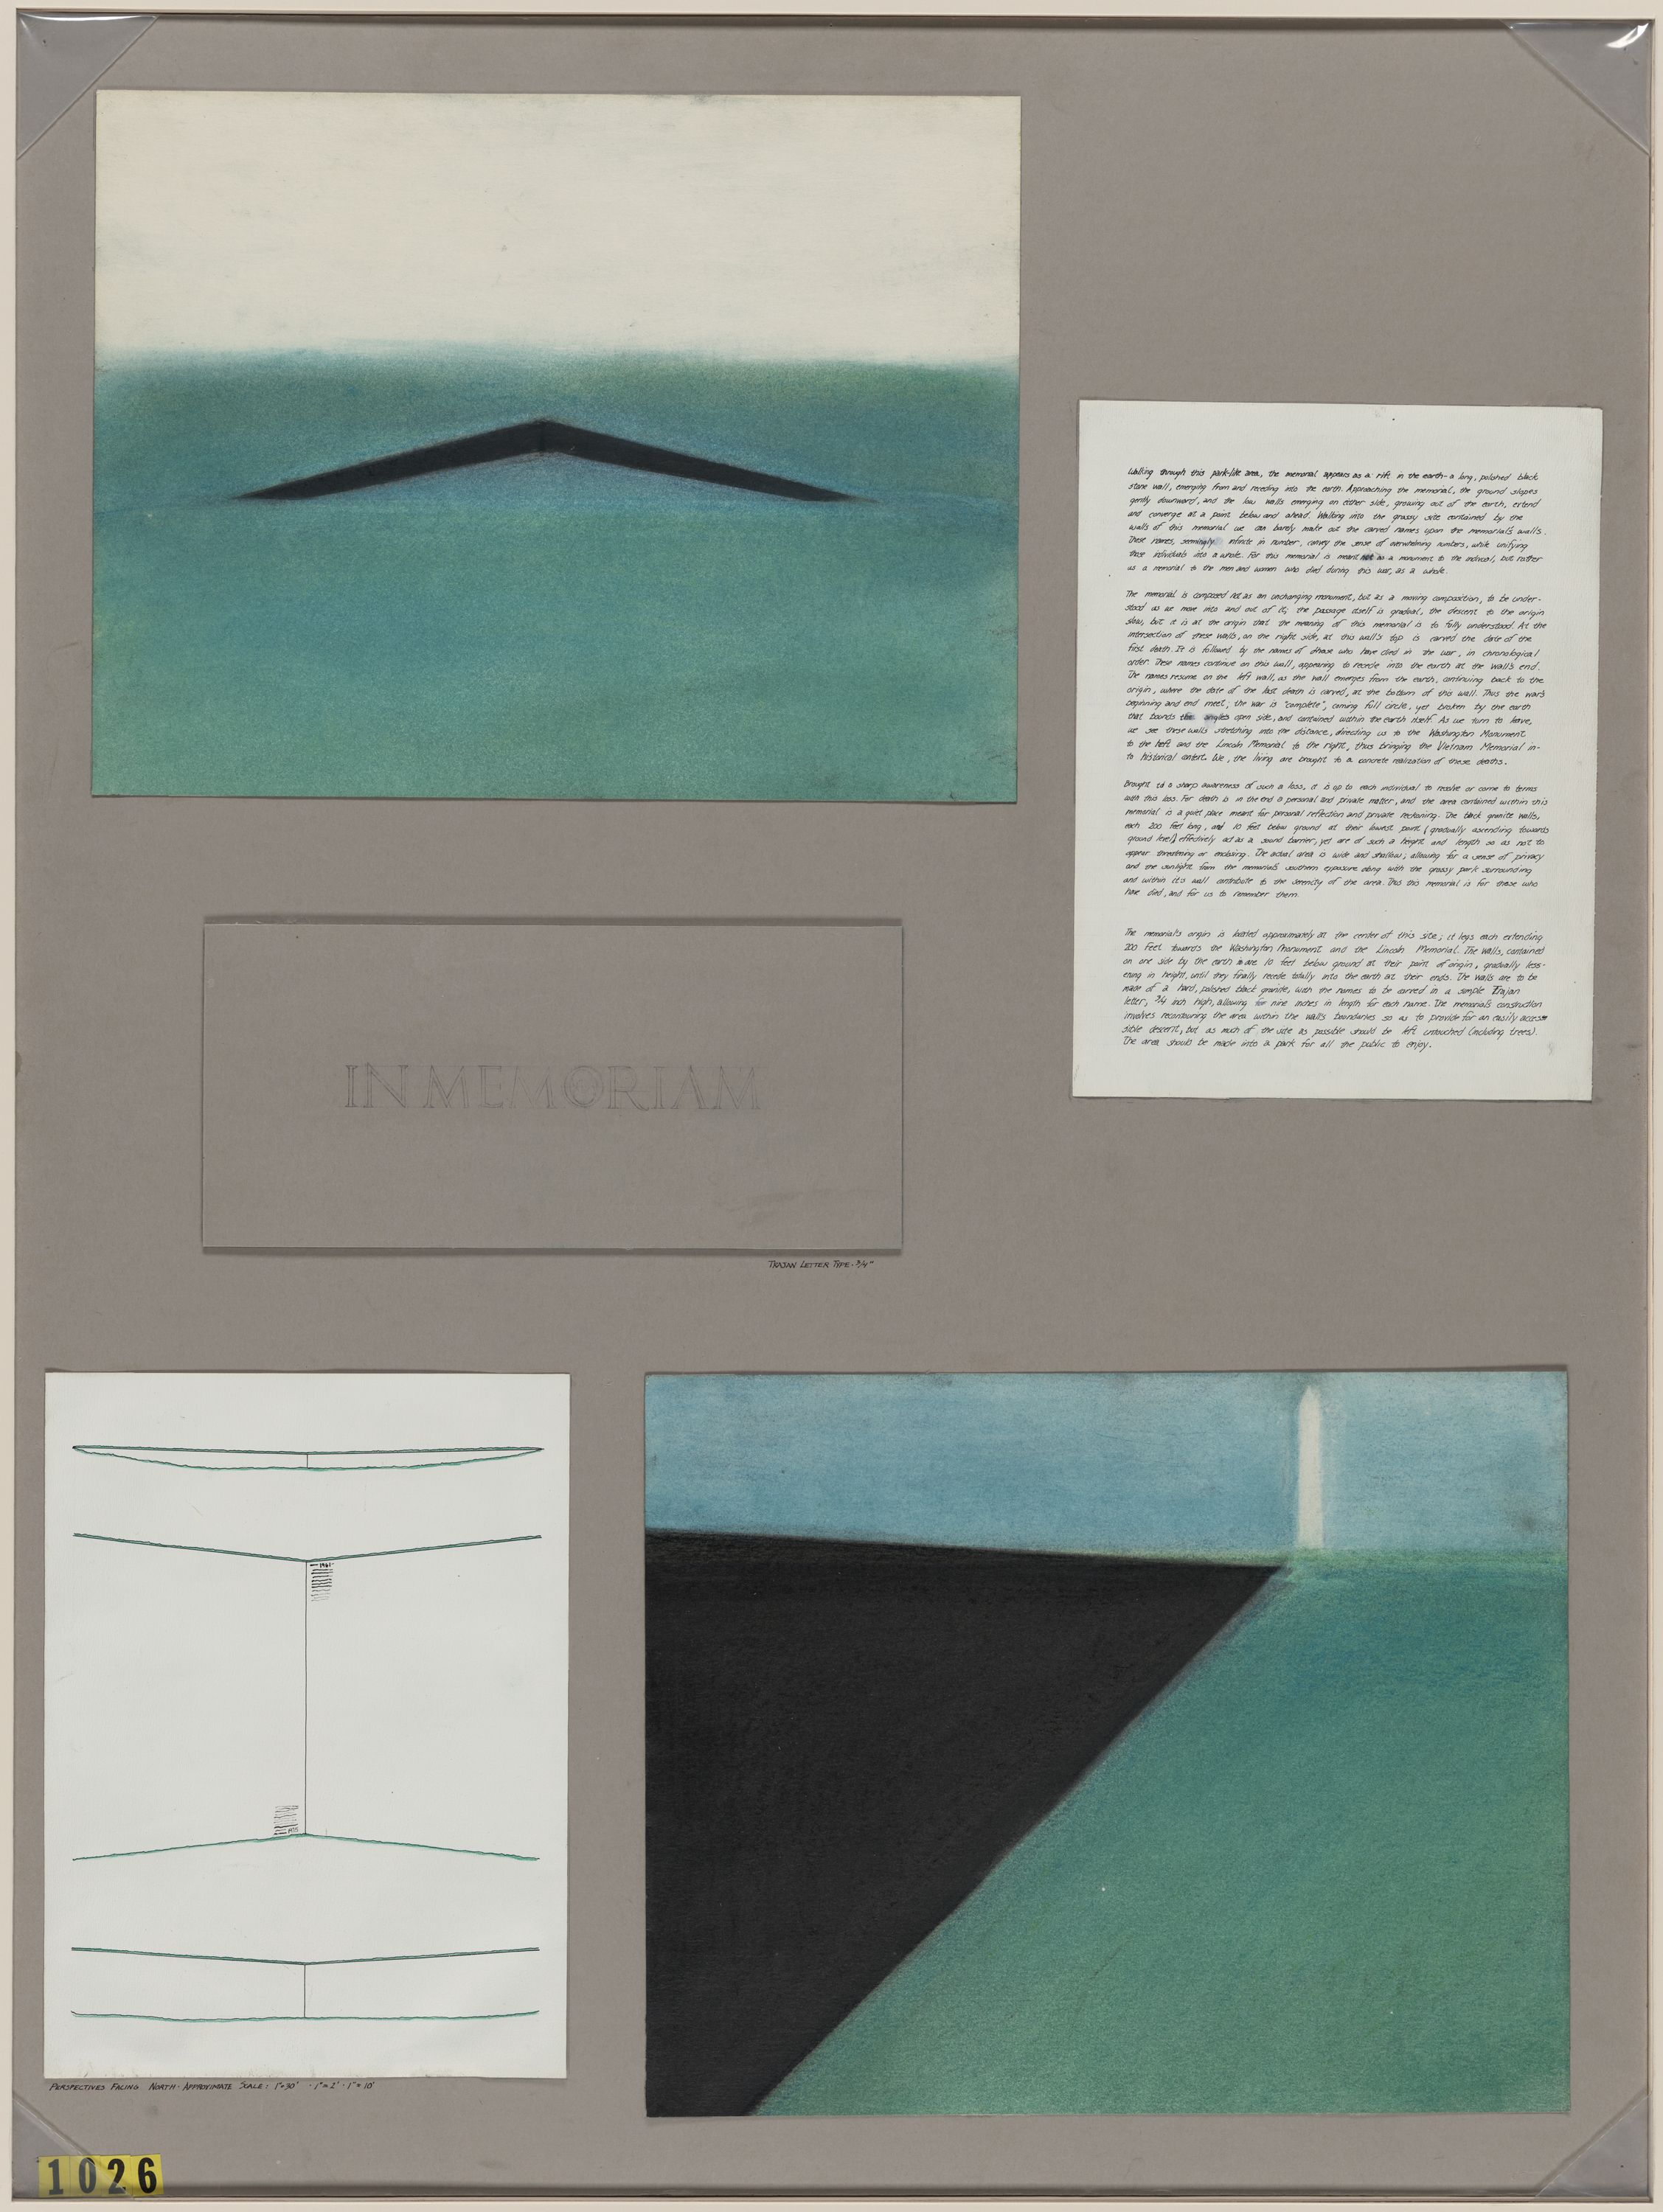 Maya Lin's submission to the Vietnam Veteran's memorial compeition